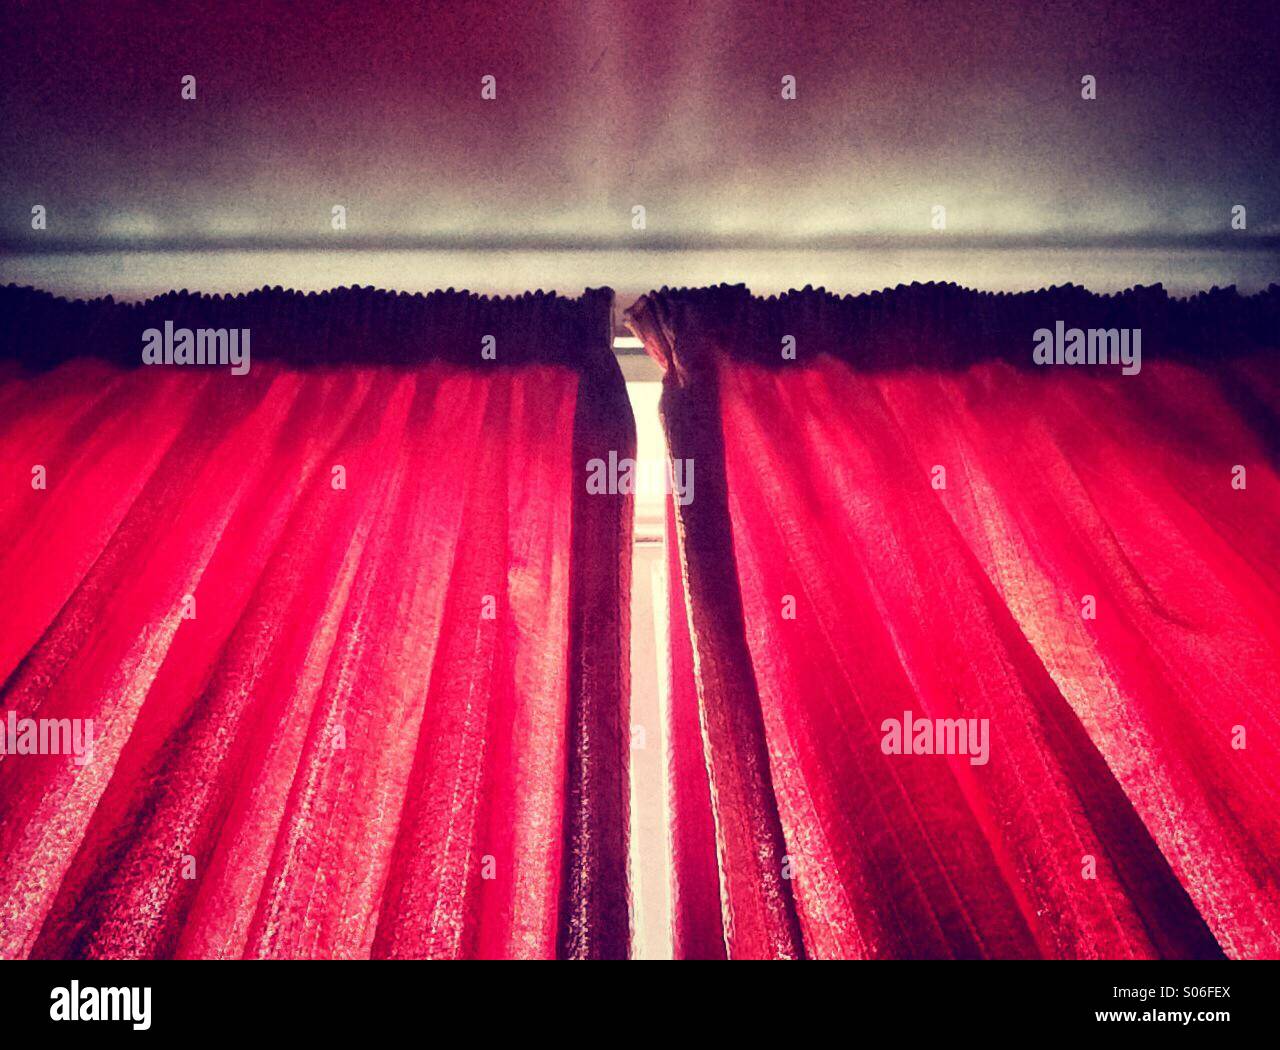 Sunlight streaming in though red curtains Stock Photo